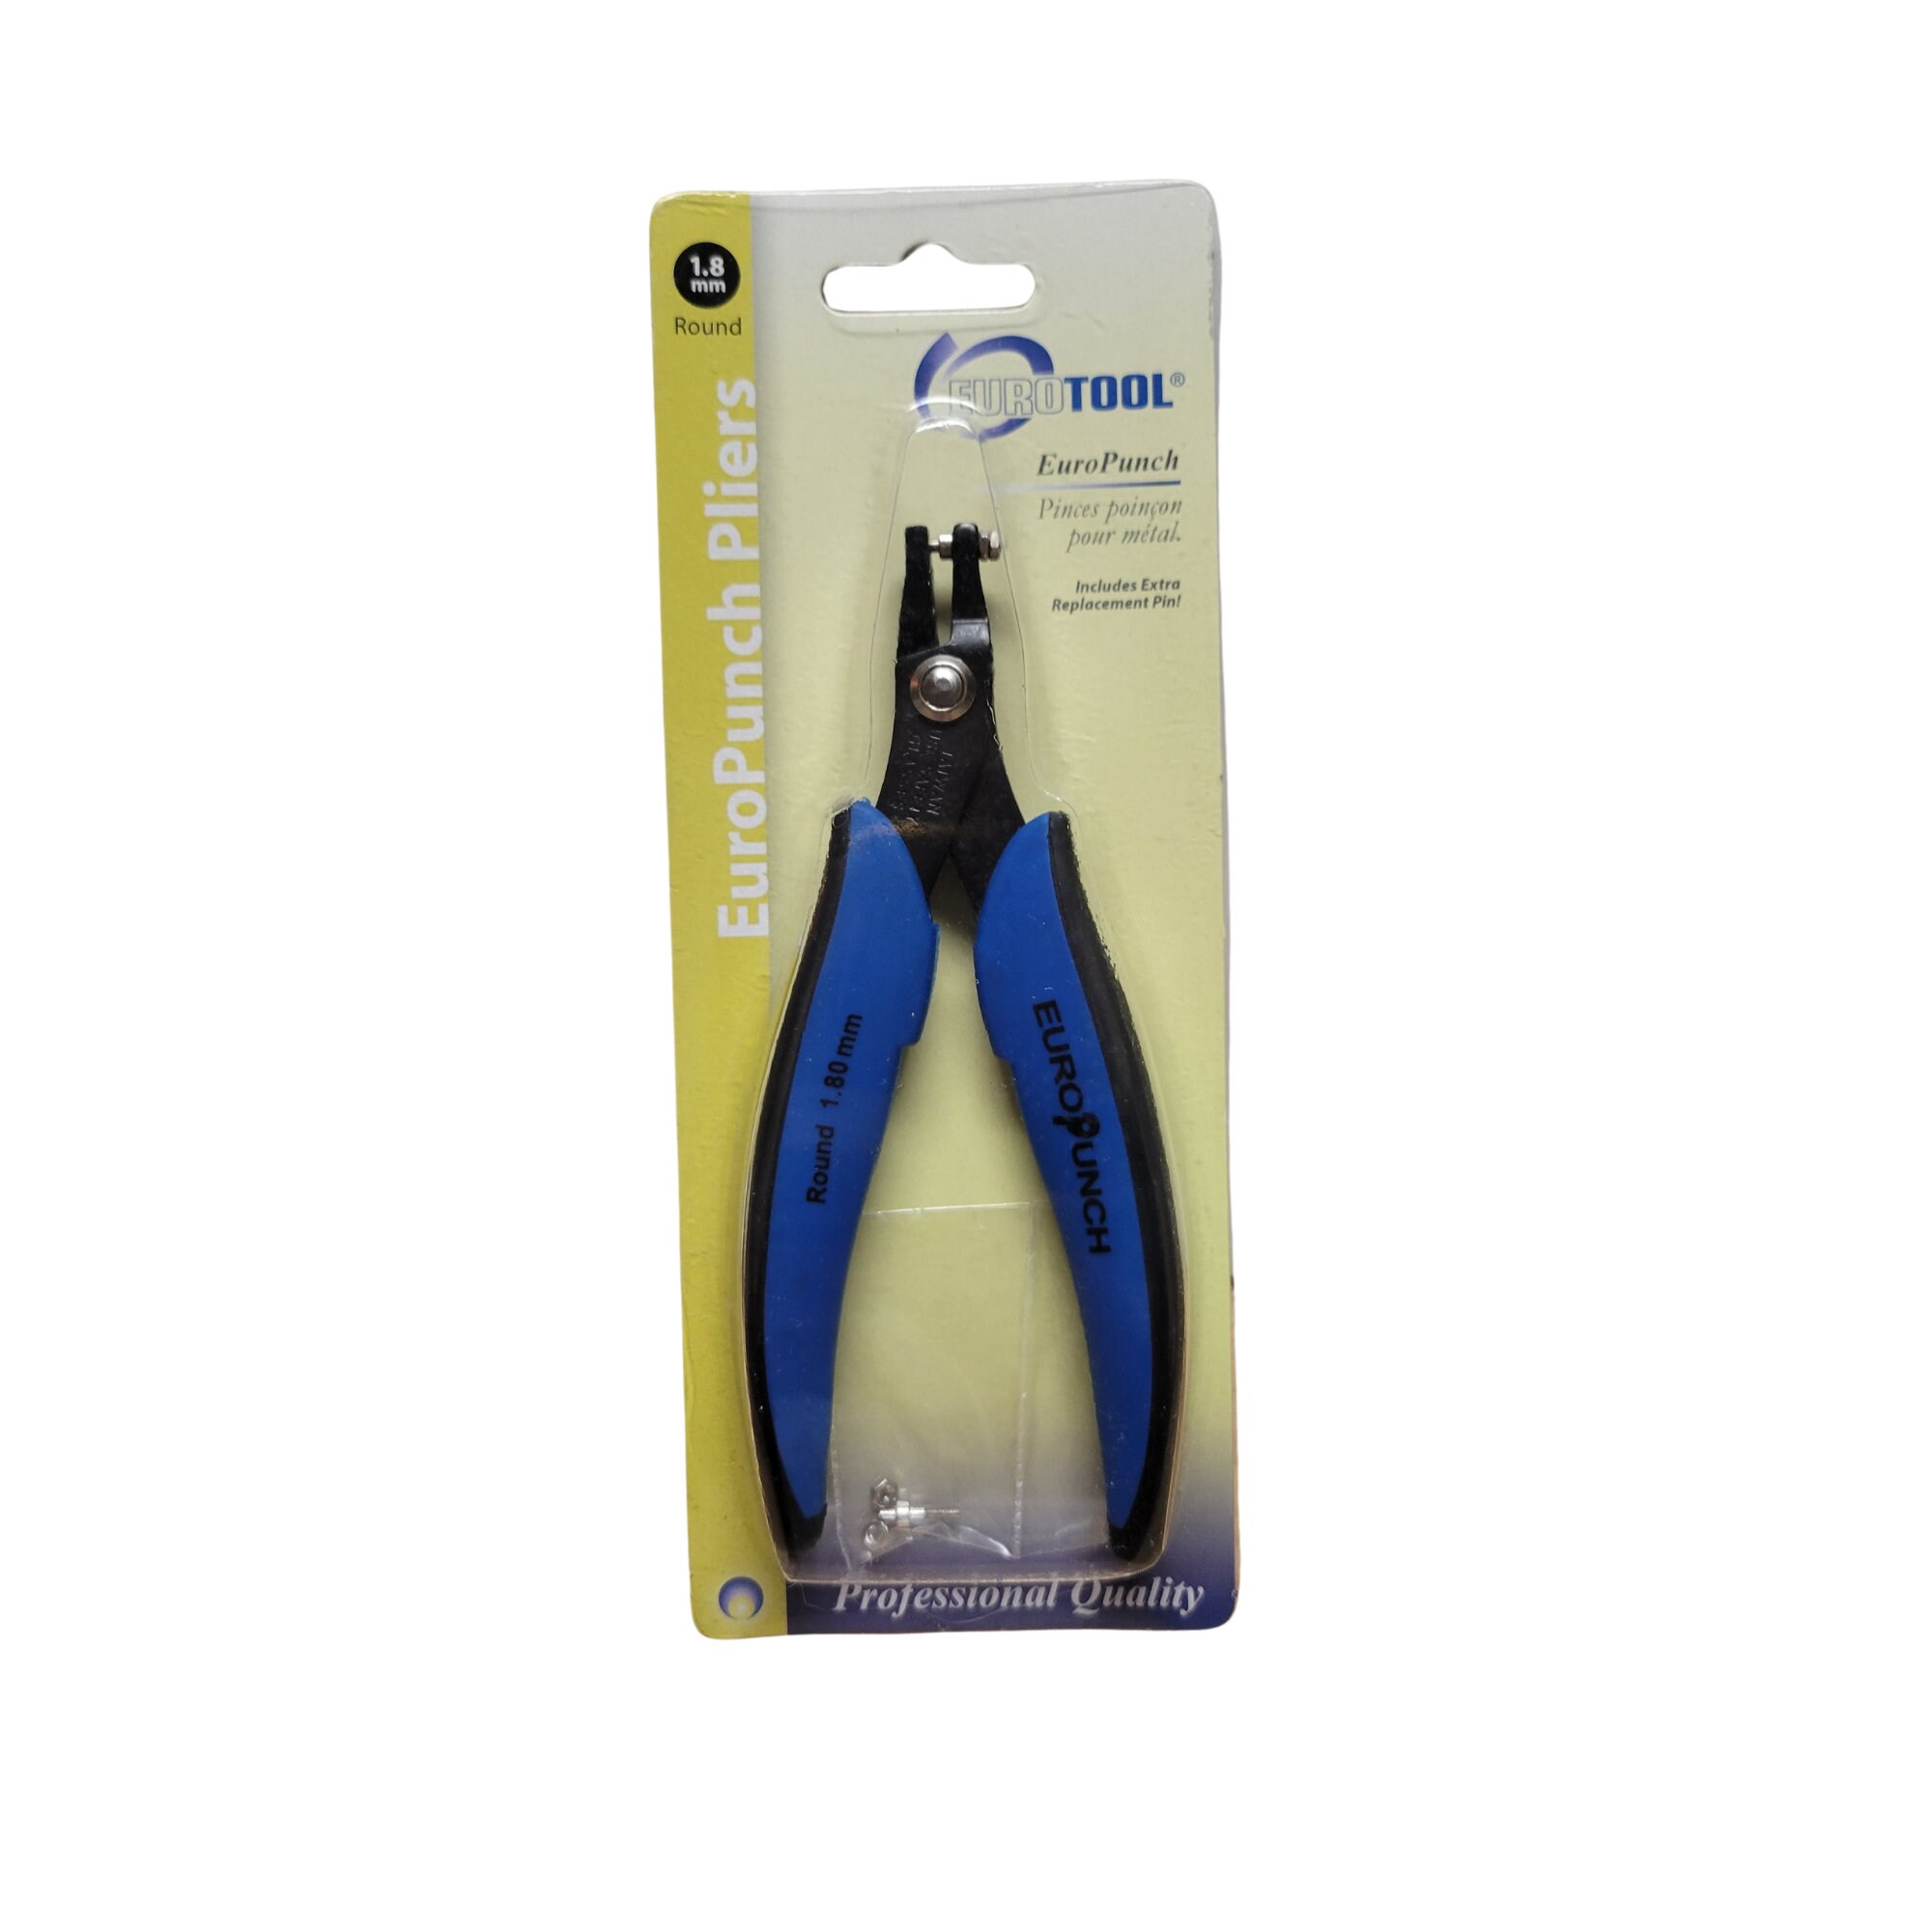 Parallel Action Hole Punch Pliers 1.6 mm-46-514